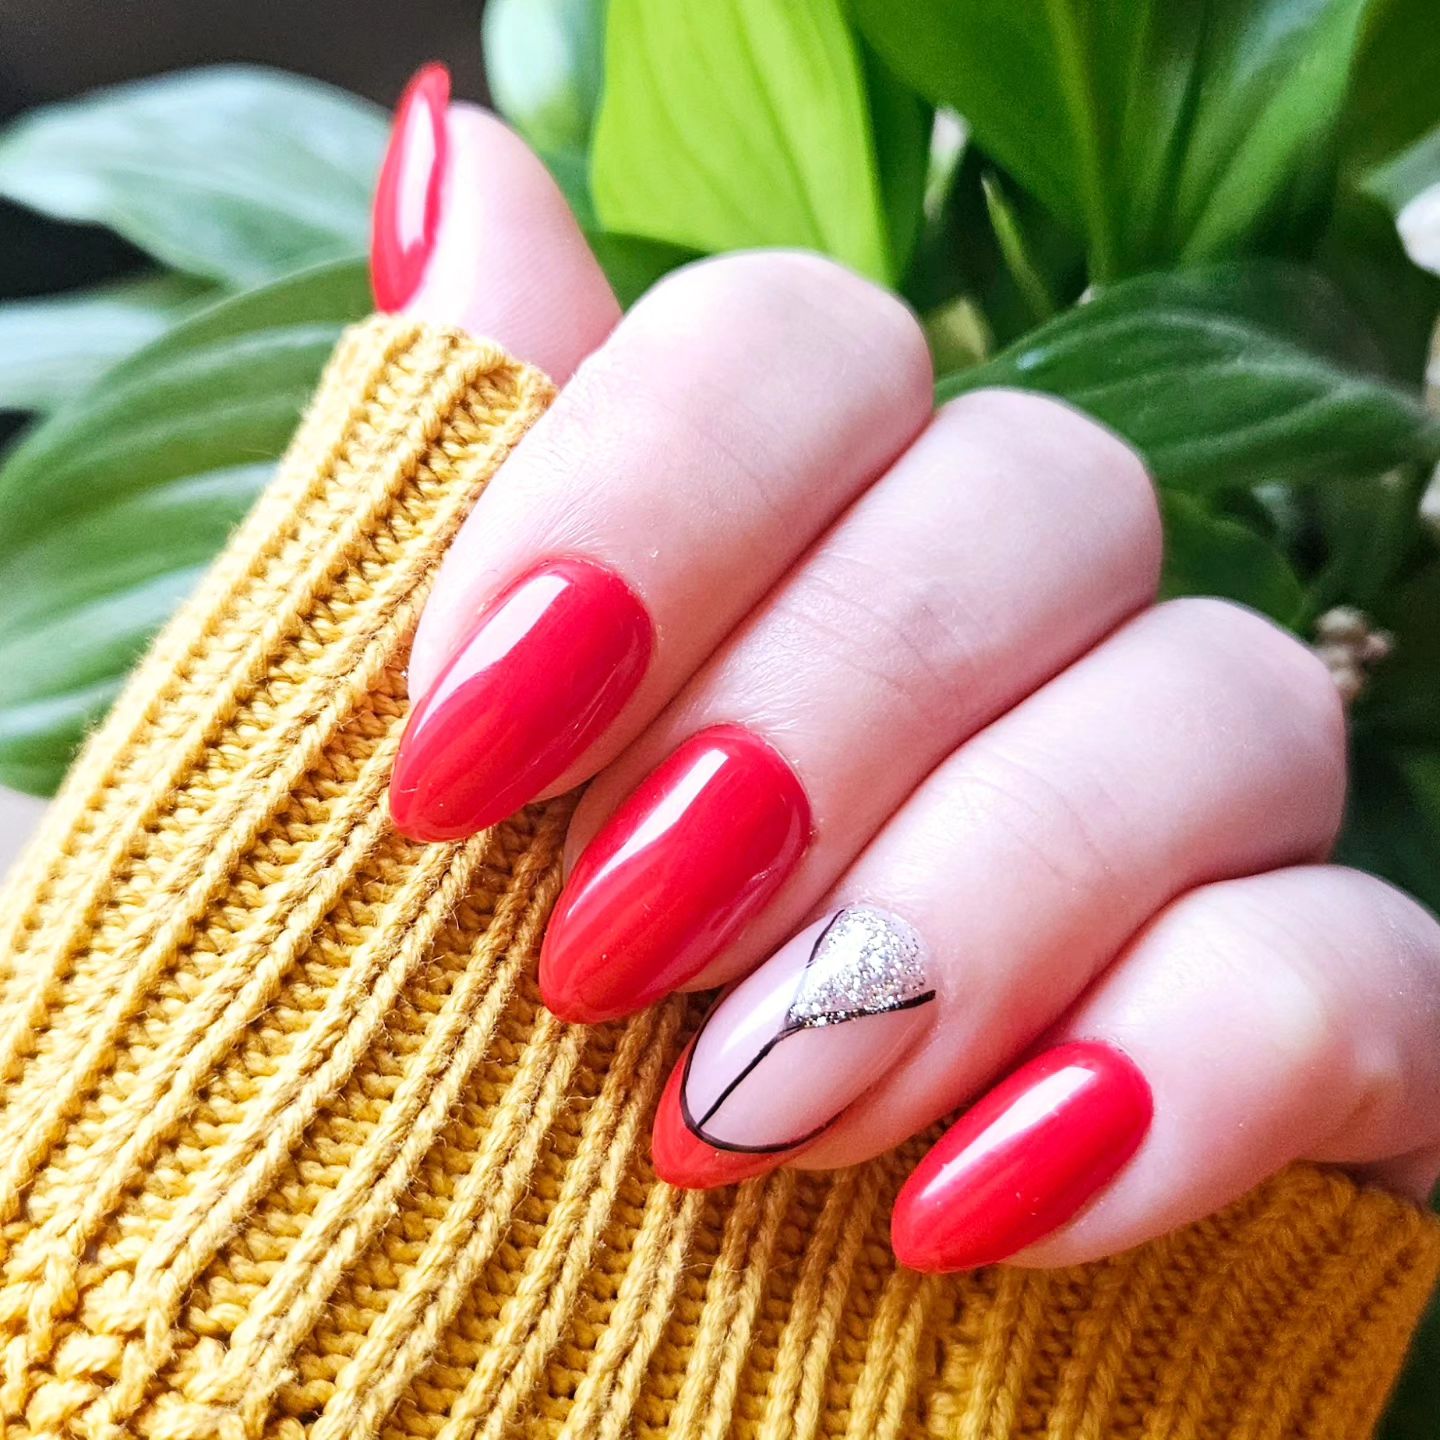 Sassy Red Almond Nails with Glittery Accent